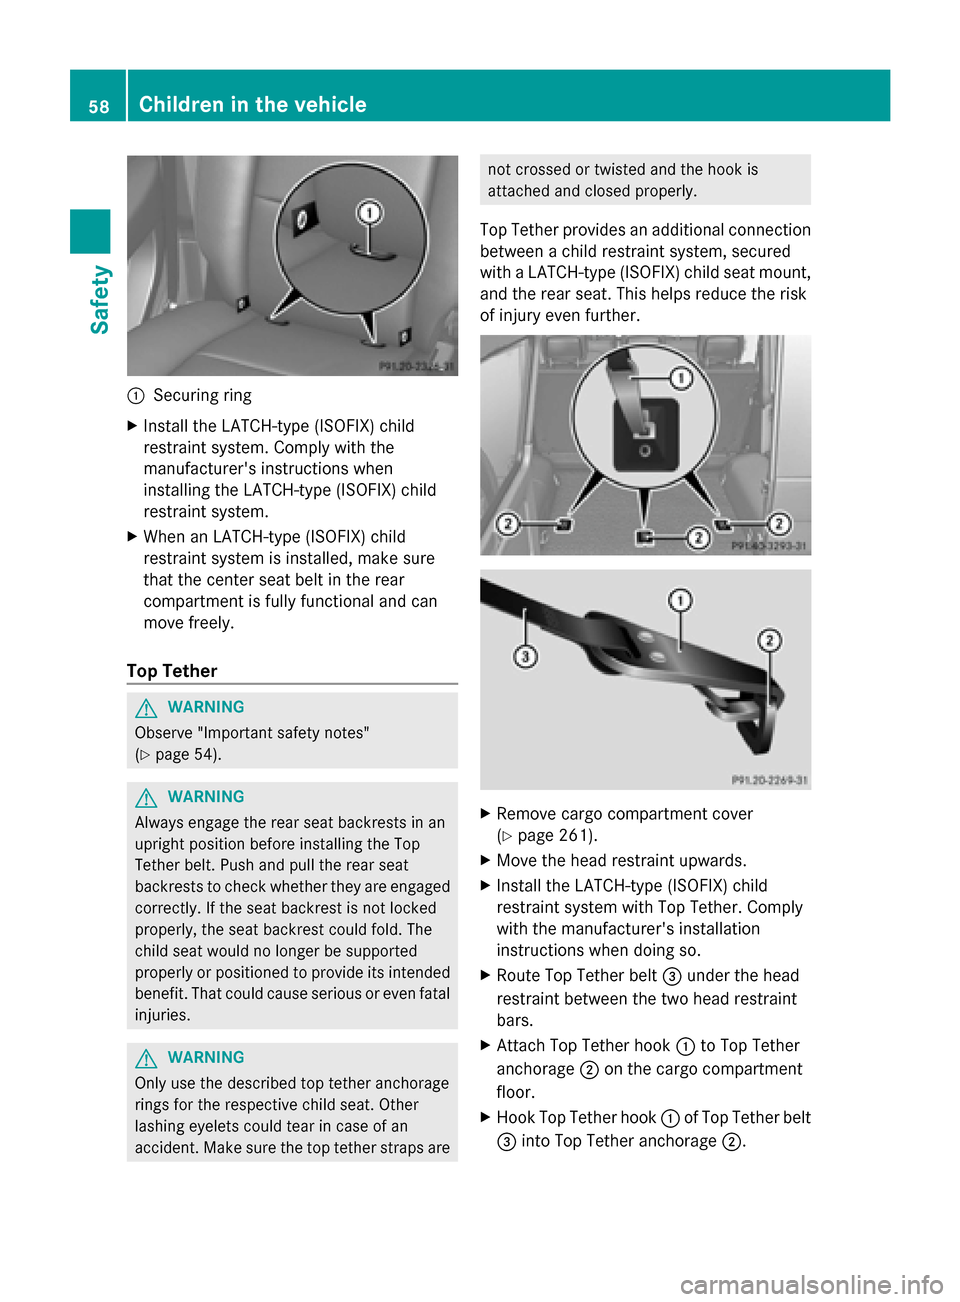 MERCEDES-BENZ G-Class 2014 W463 User Guide 0043
Securing ring
X Install the LATCH-type (ISOFIX) child
restraint system. Comply with the
manufacturers instructions when
installing the LATCH-type (ISOFIX) child
restraint system.
X When an LATCH